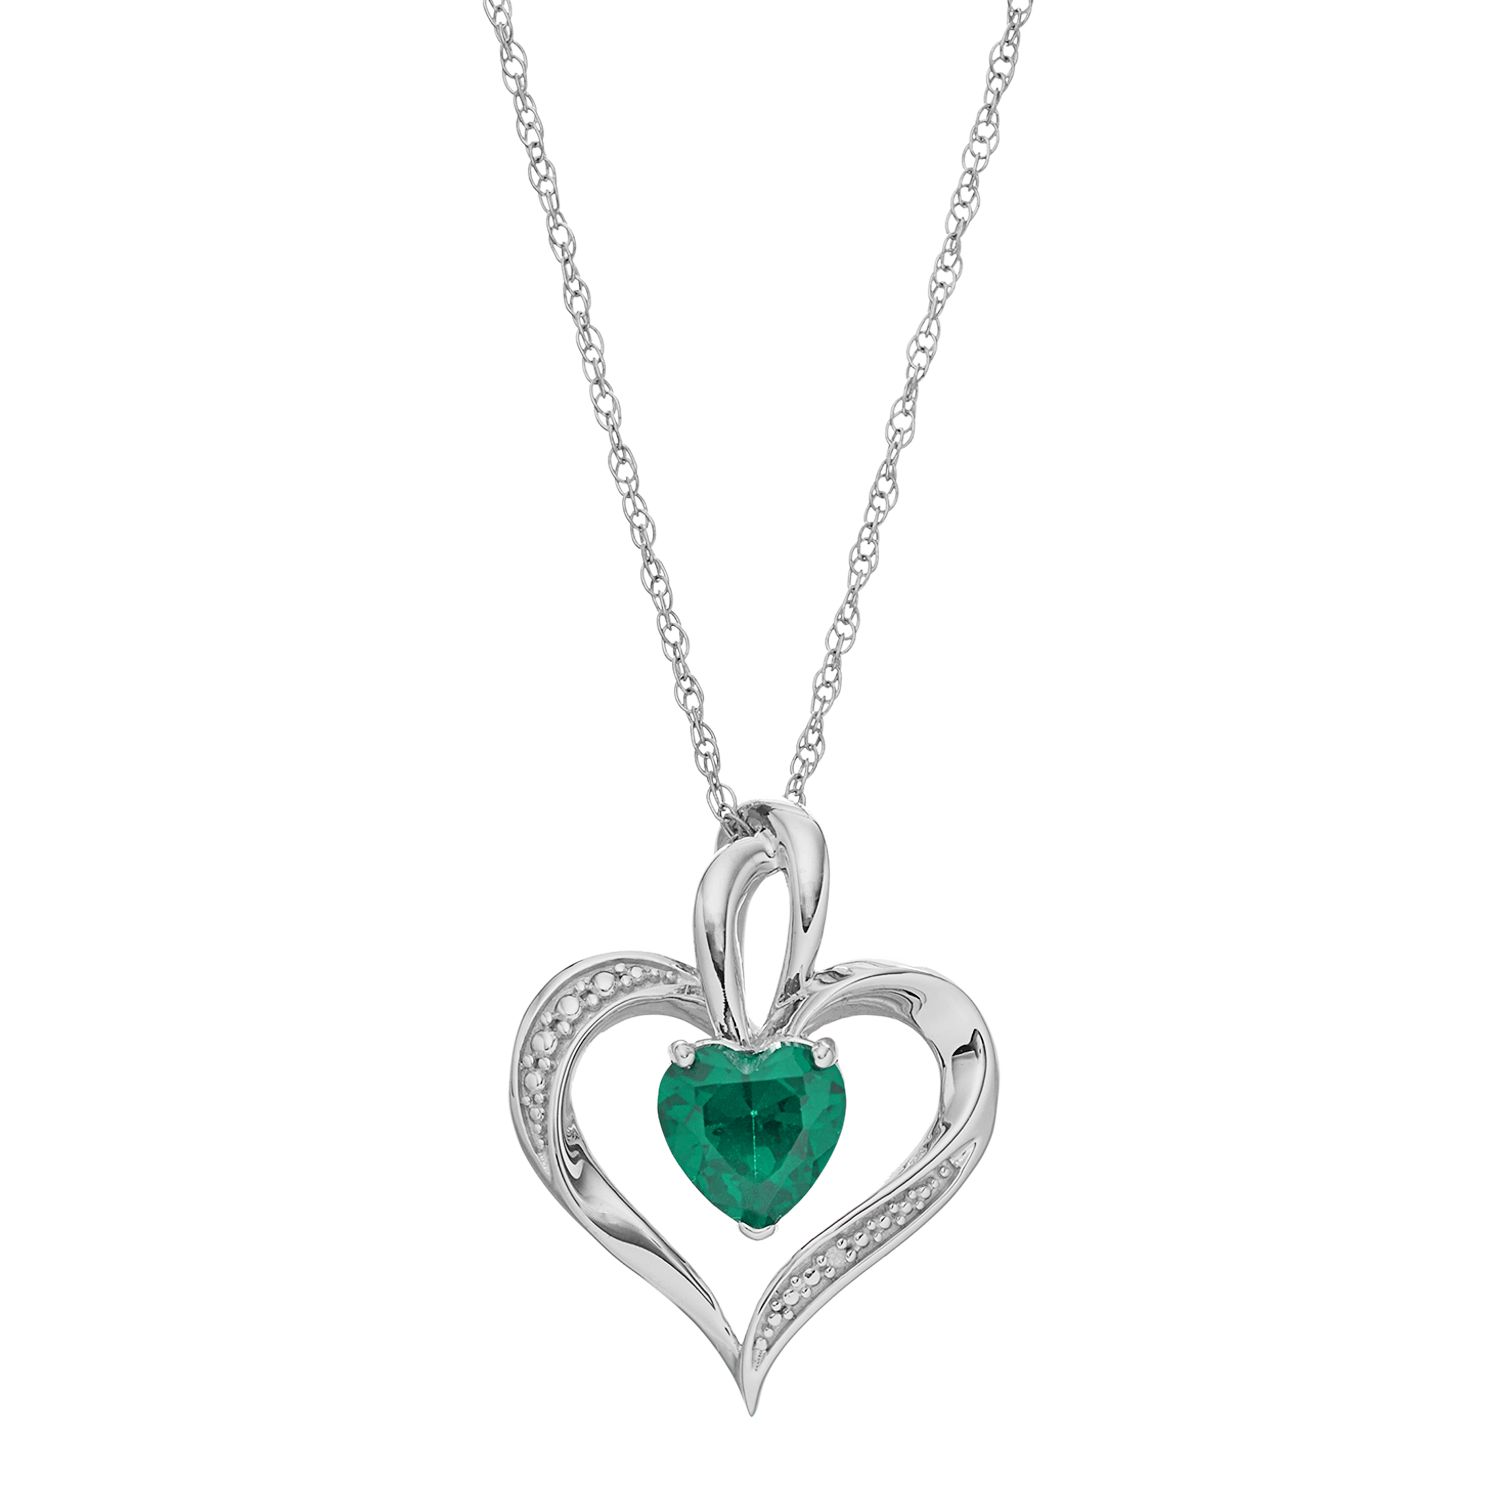 Emerald Heart Pendant Necklace Top Sellers, 50% OFF | www ...